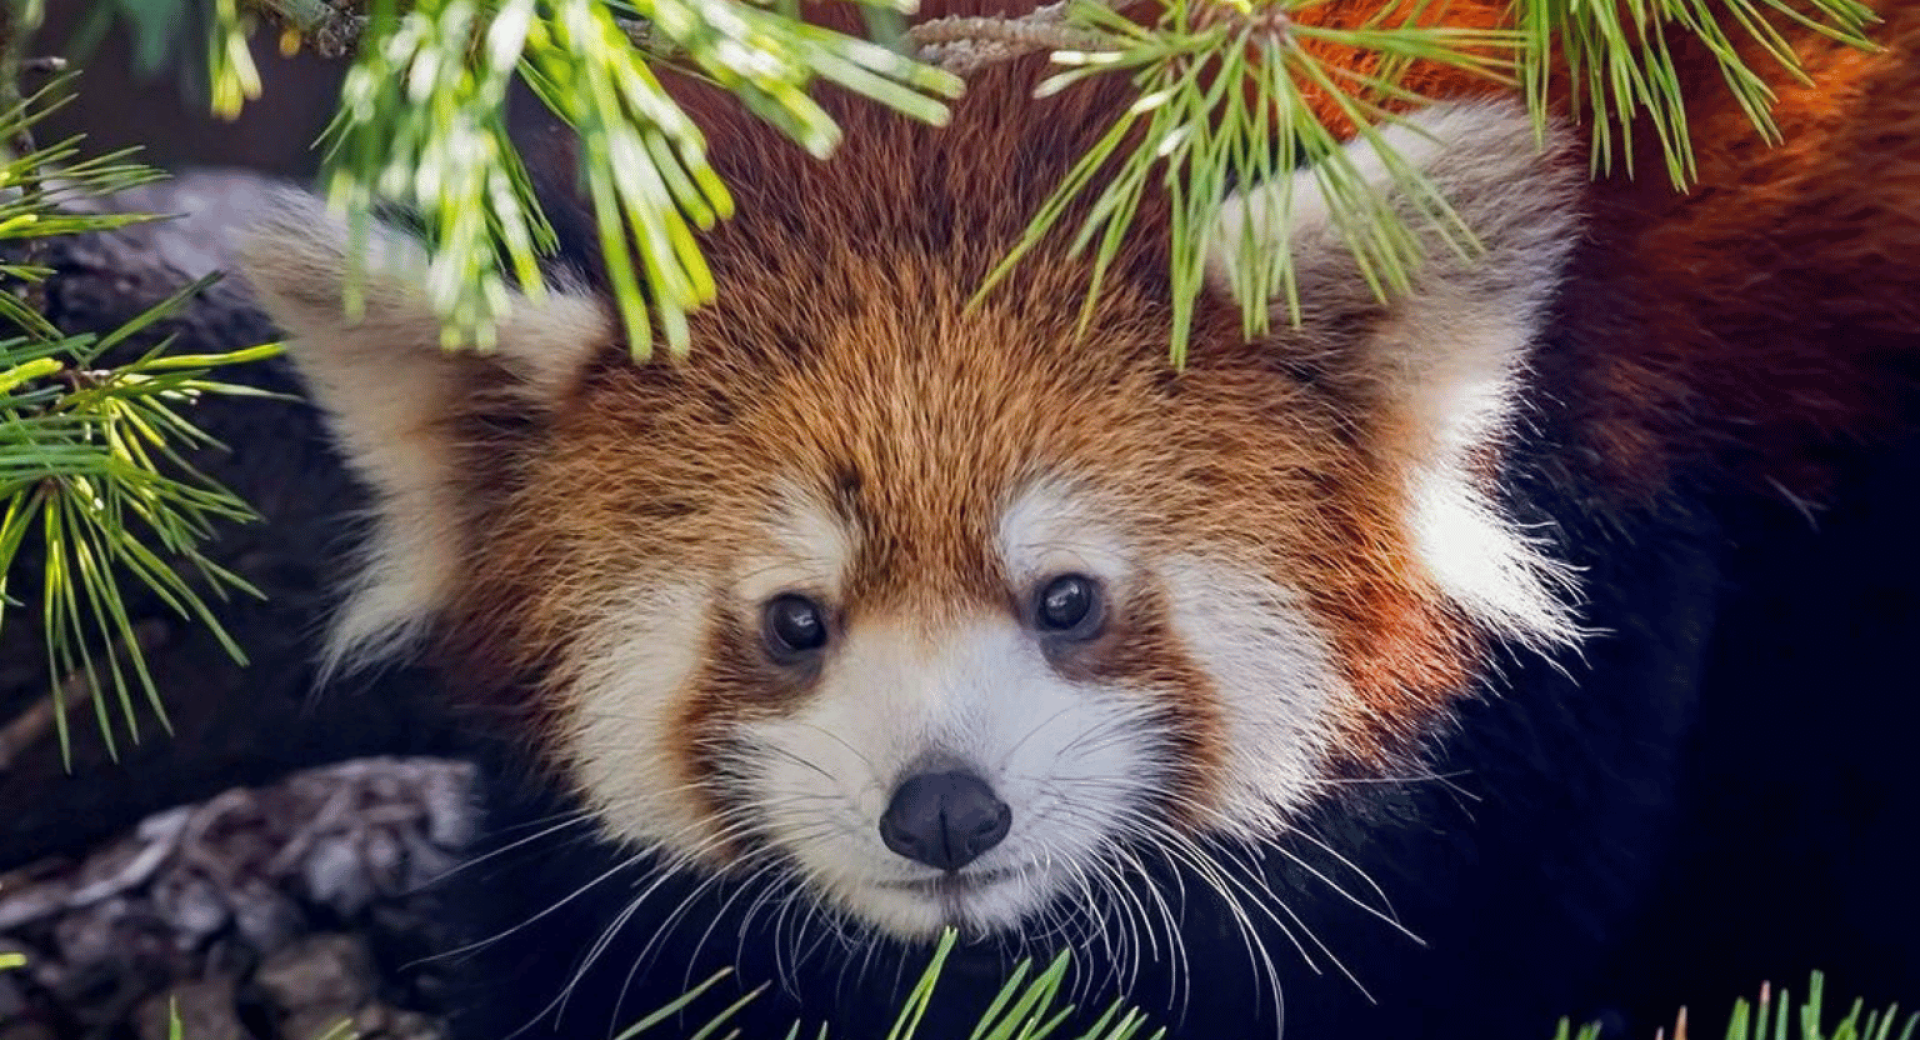 A New Home for Red Pandas